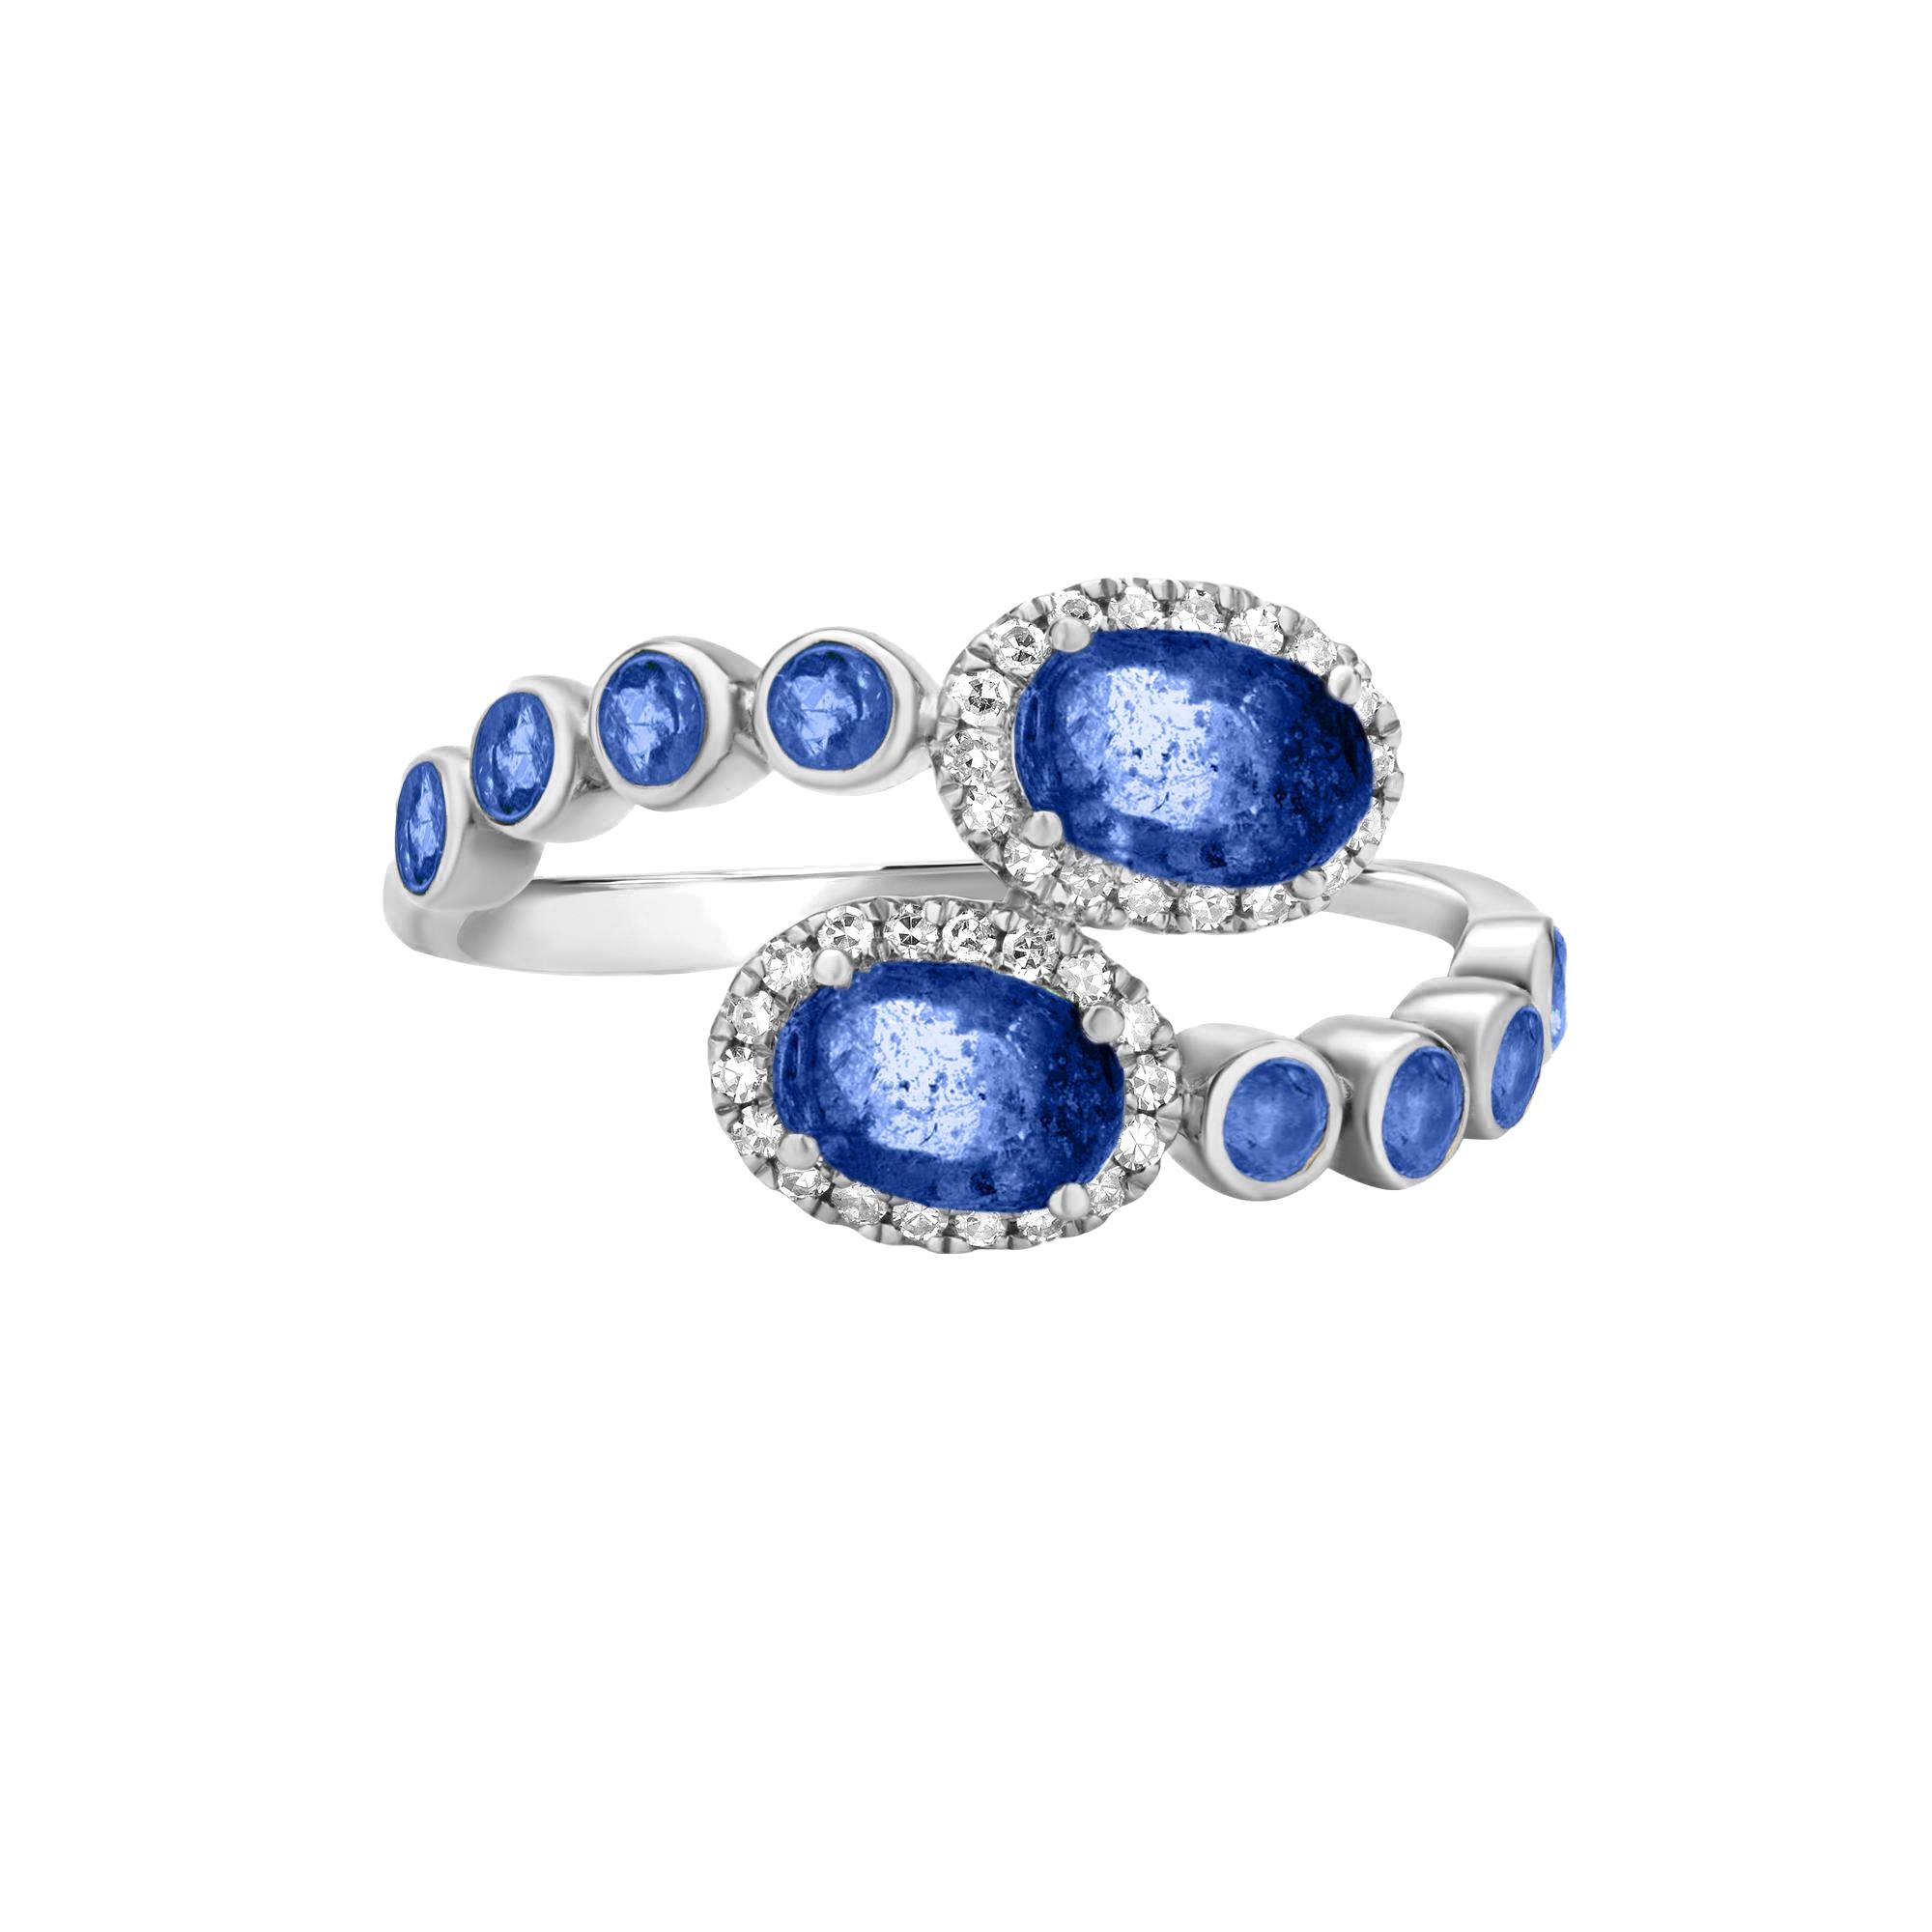 Oval Cut Gemistry 1.87 Cttw. Diamond and Blue Sapphire Swirl Ring in 18k White Gold For Sale